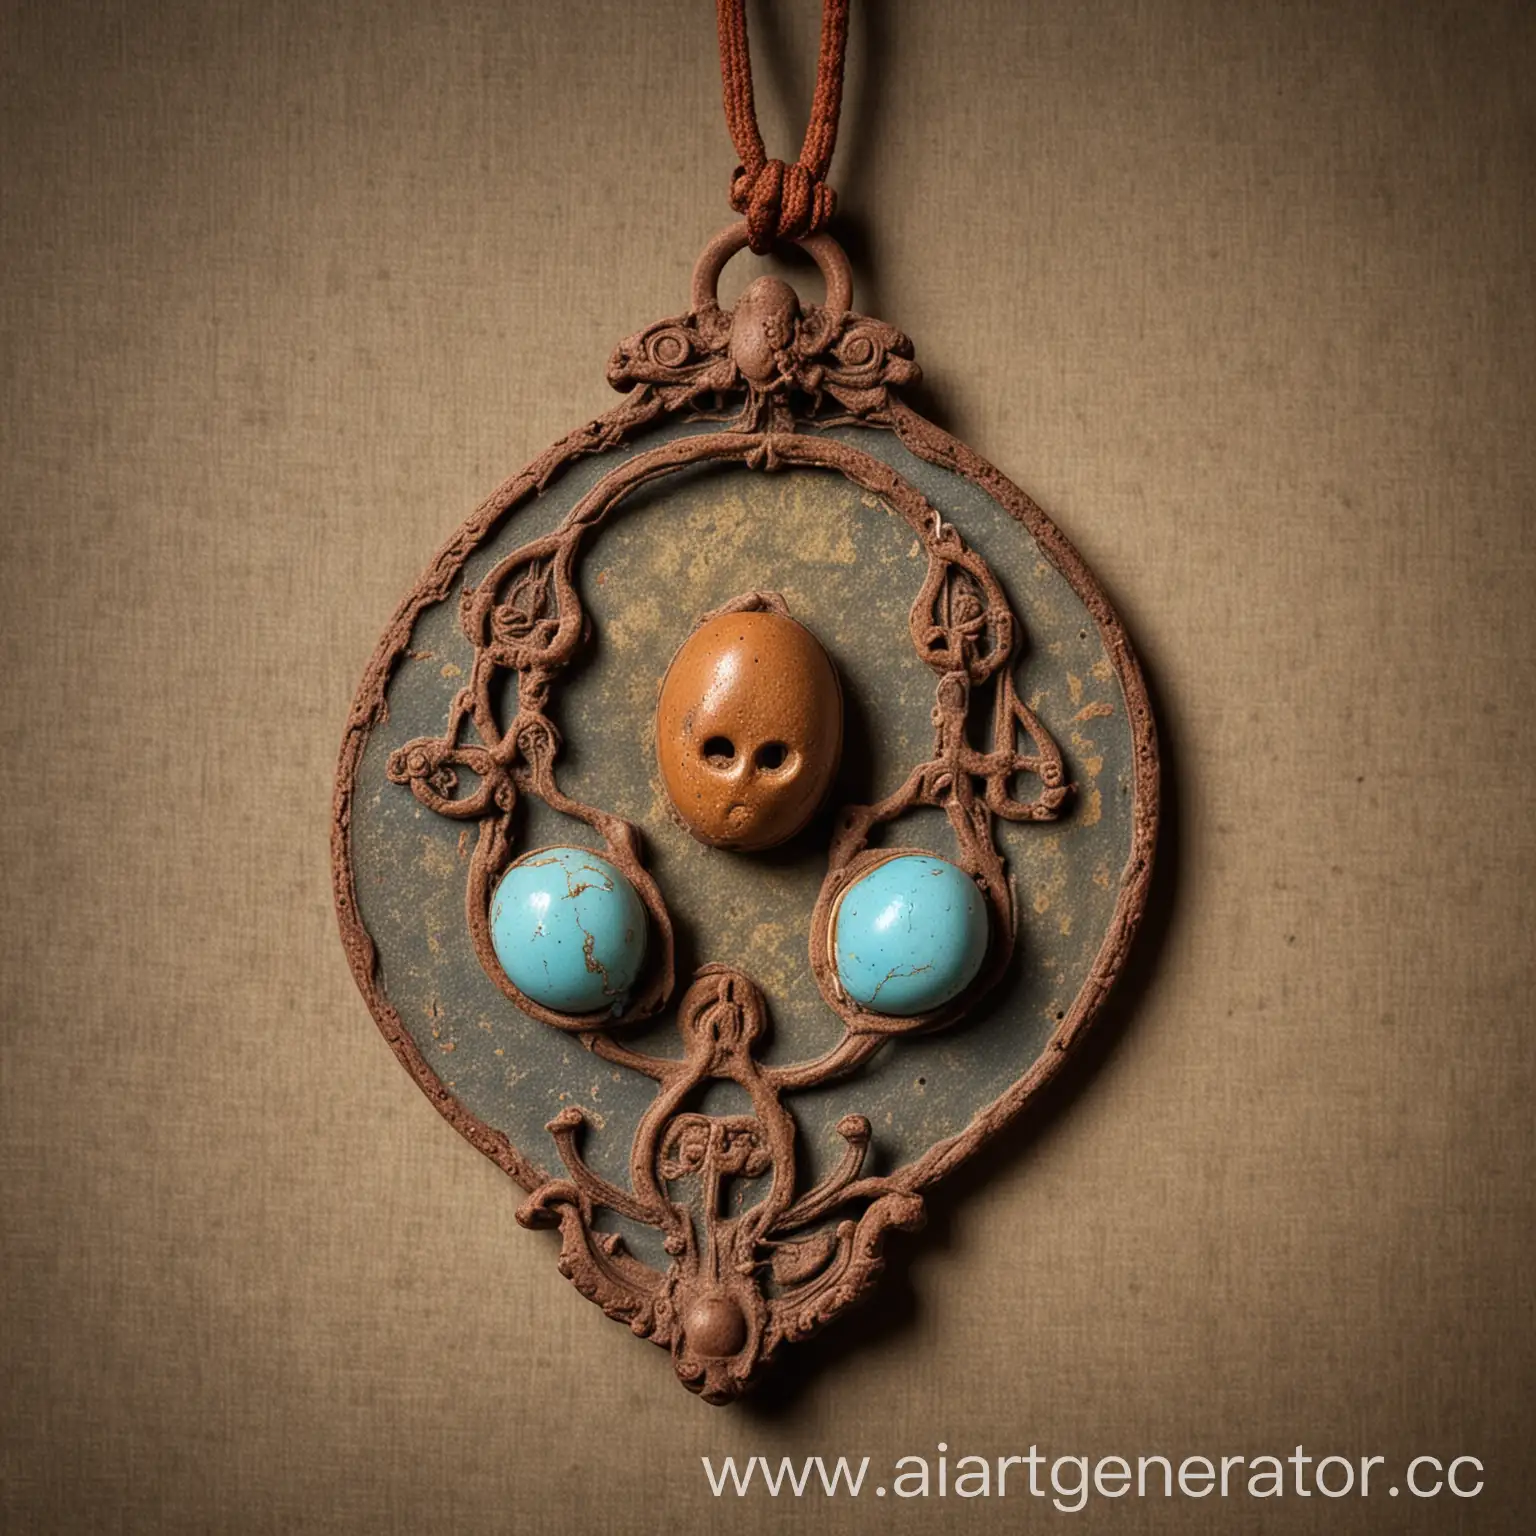 Ancient-Rusty-Amulet-with-Two-Embryos-Connected-by-One-Umbilical-Cord